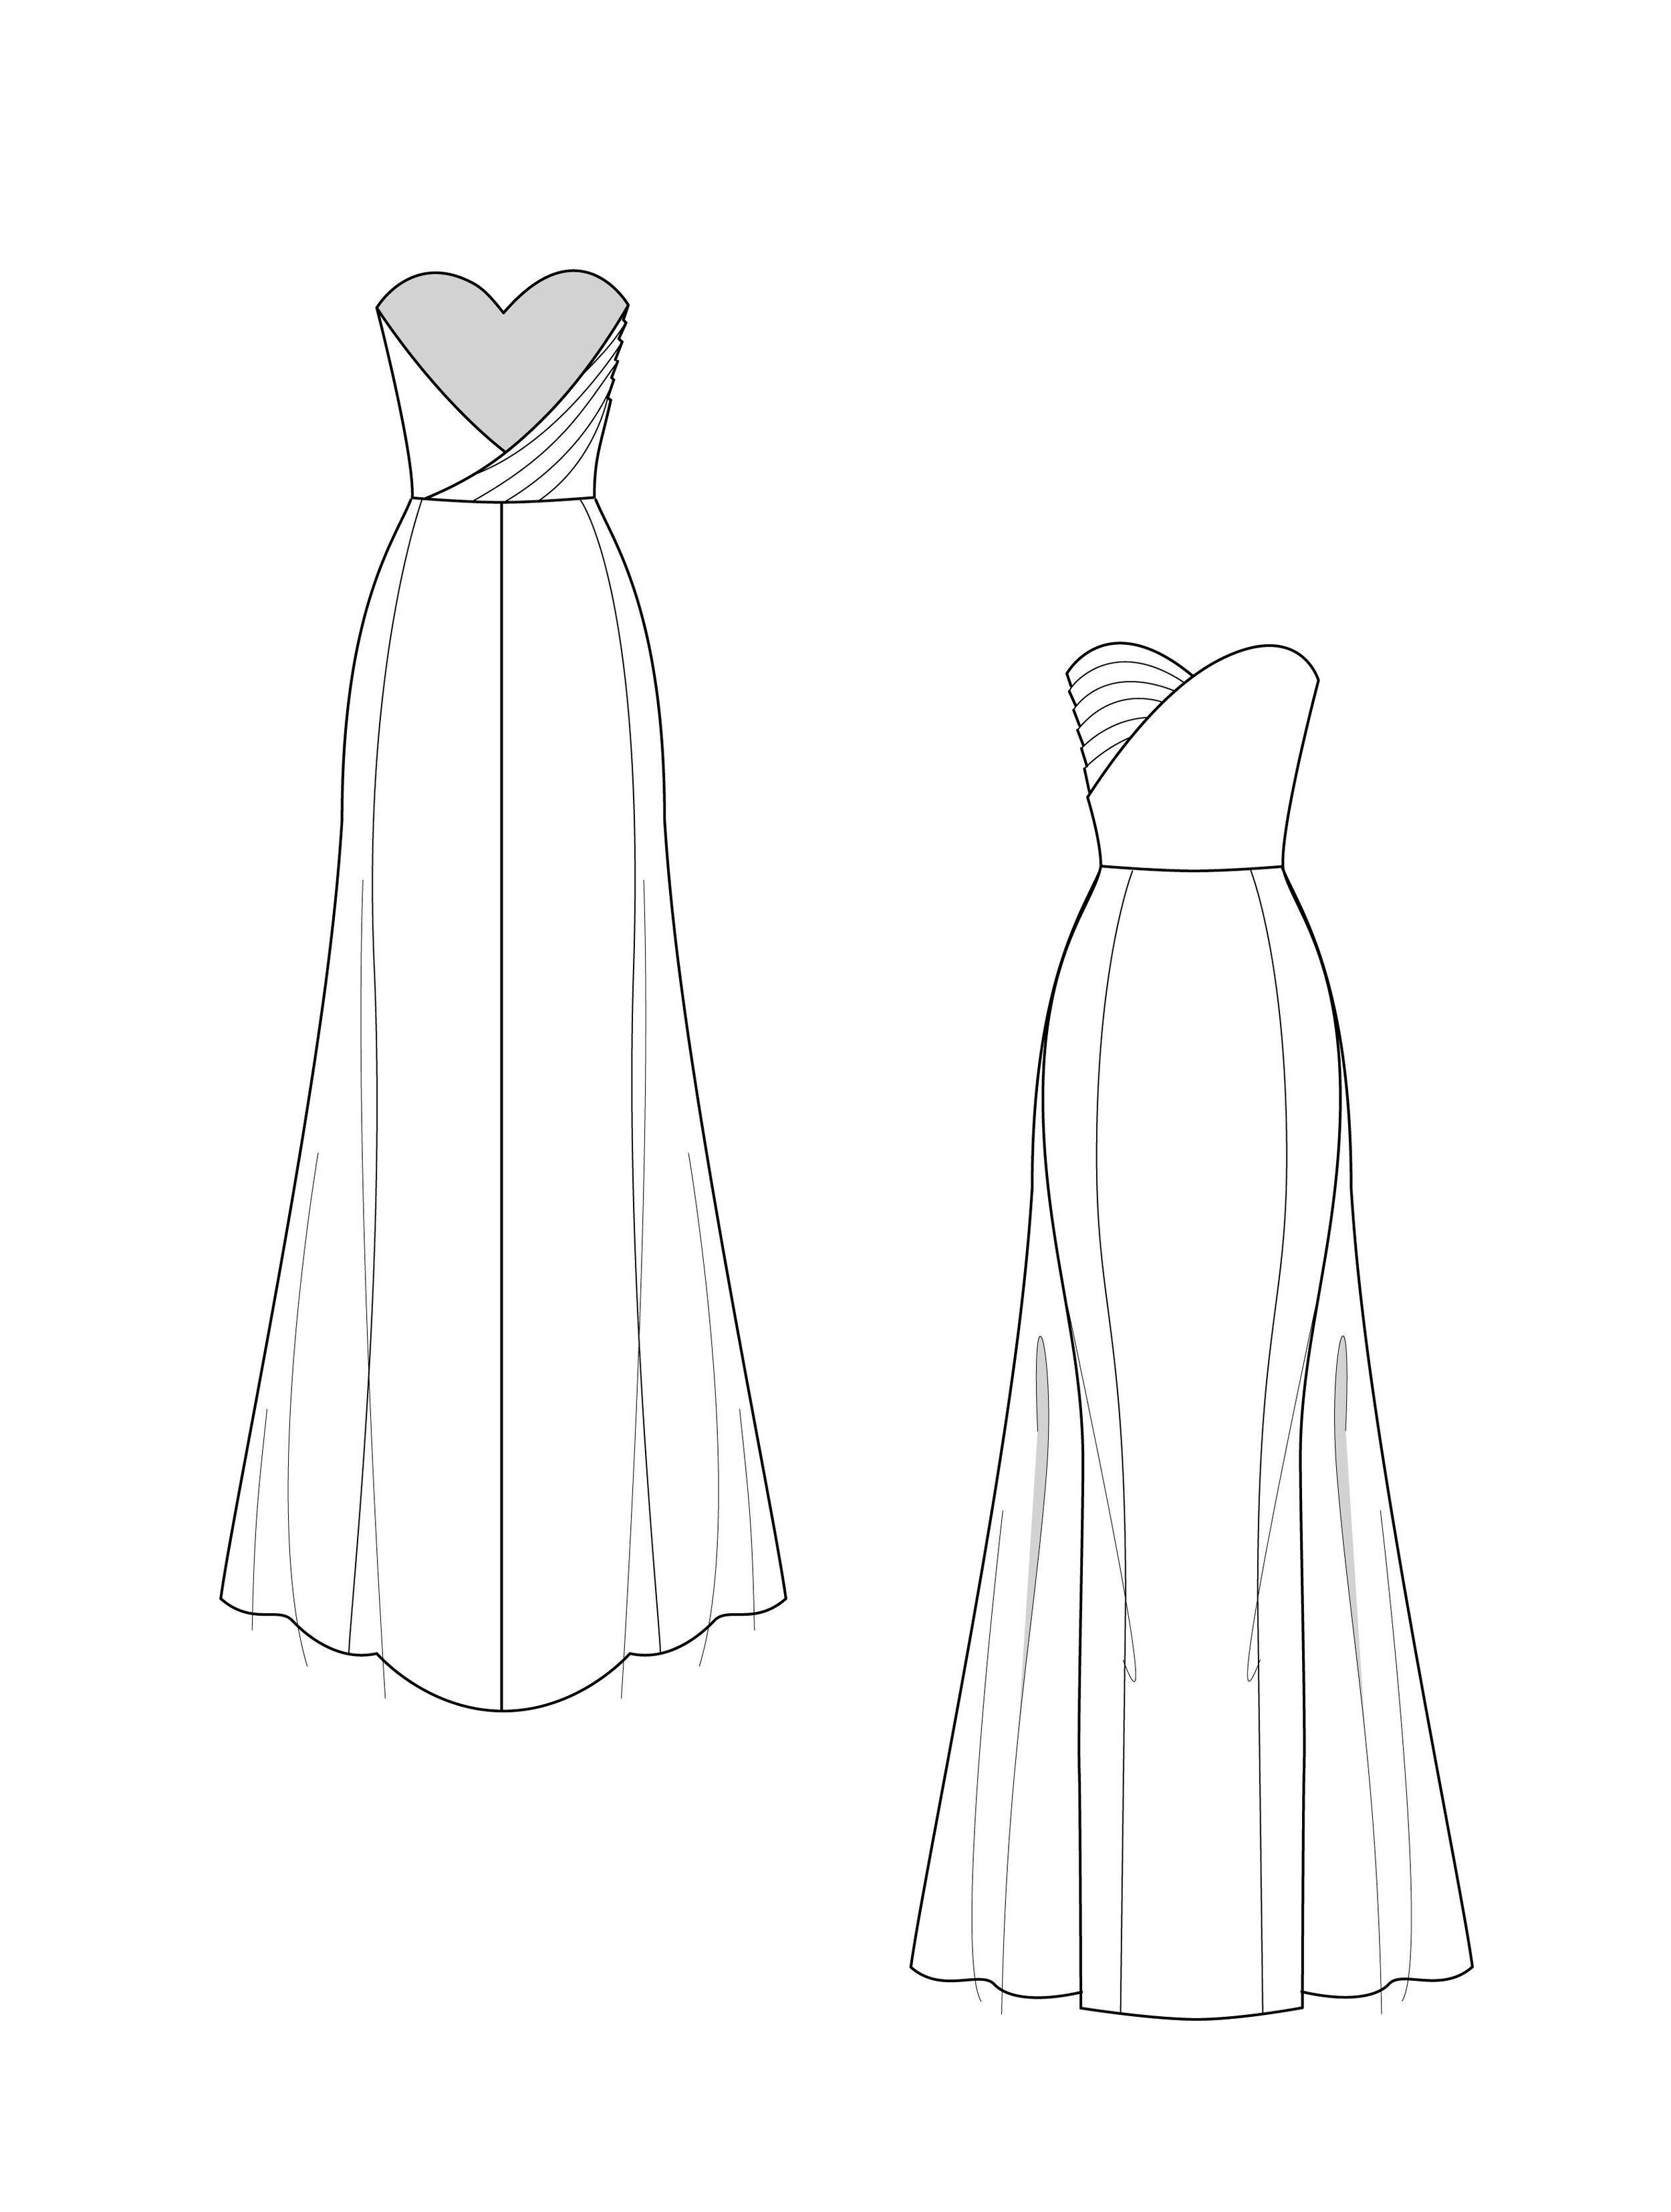 Women long dress fashion flat sketch template. technical fashion  illustration. girls empire waist dress with flare sleeve | CanStock